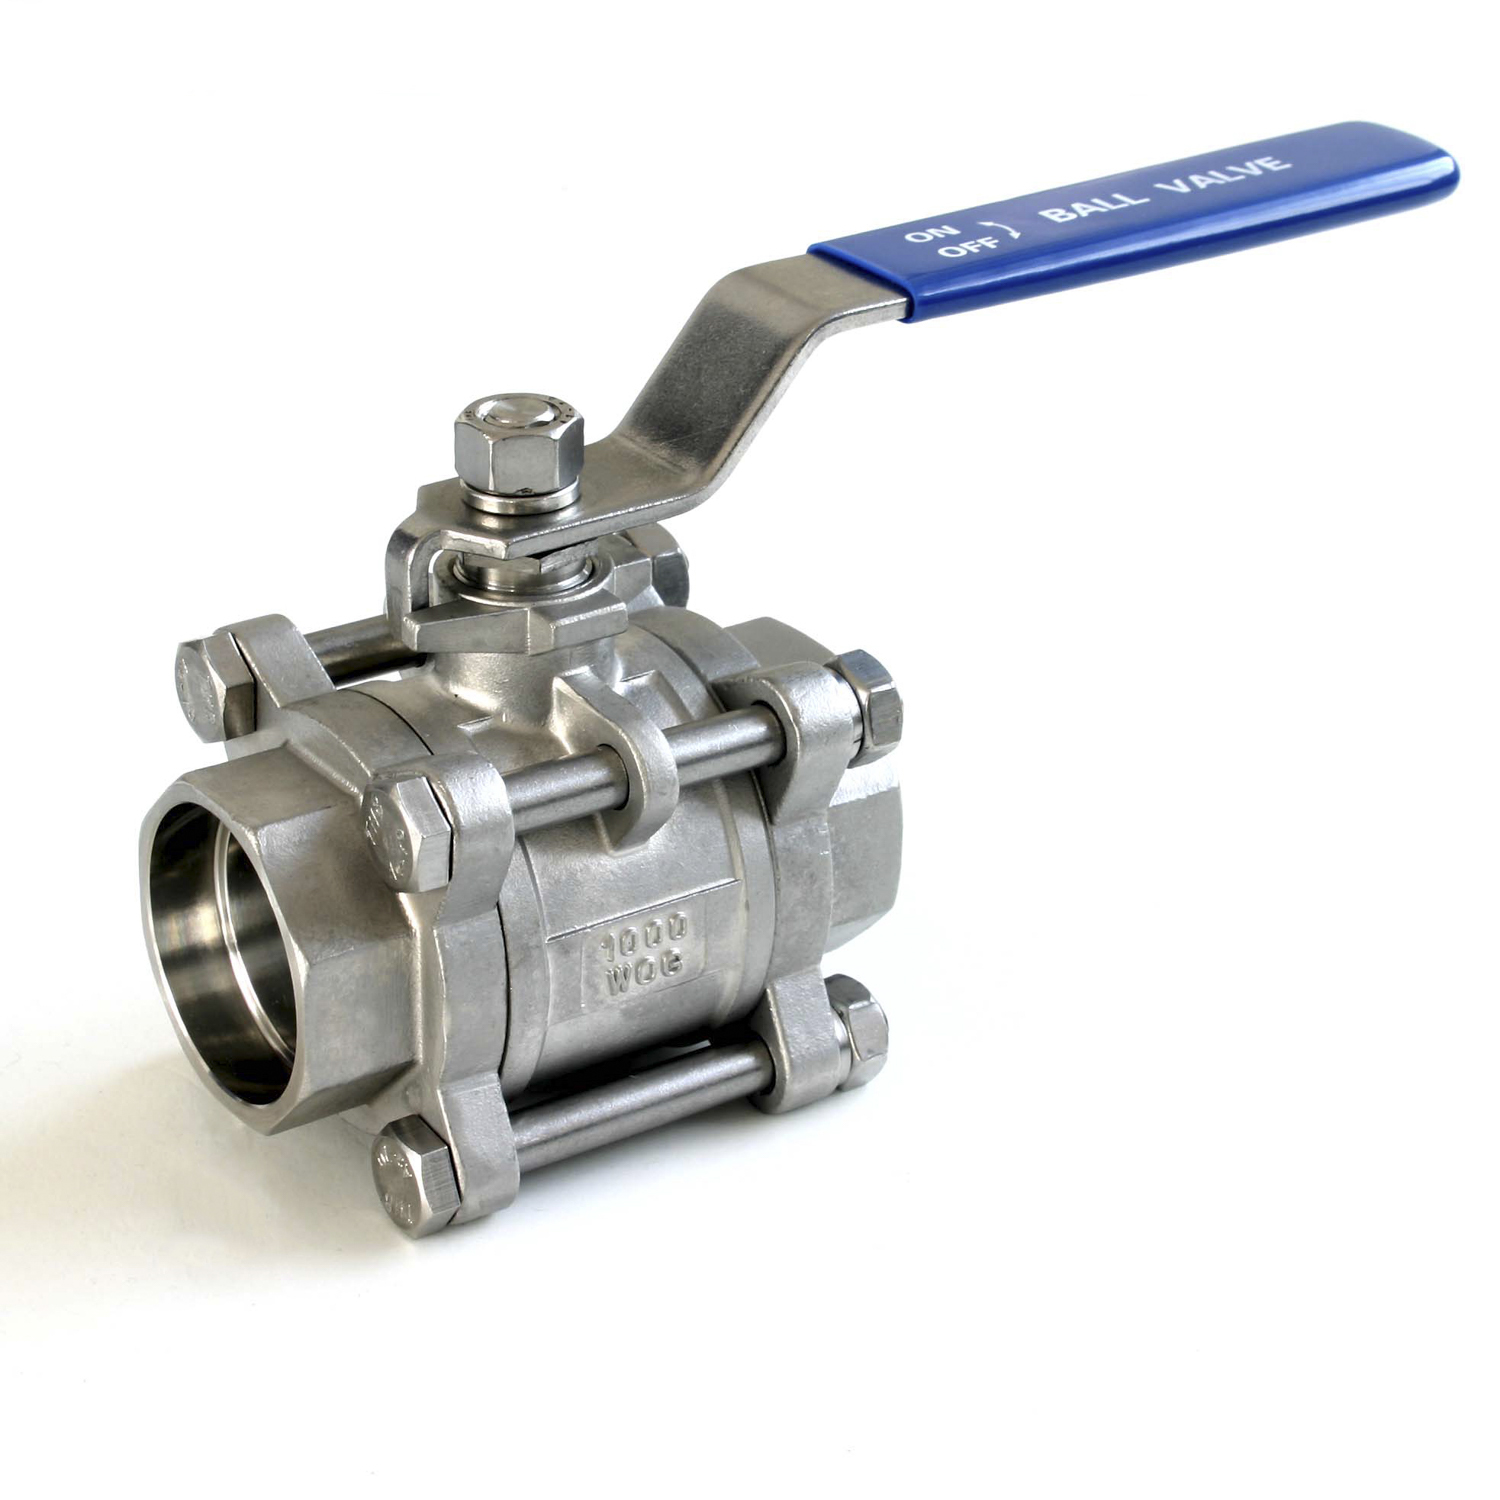 Inox Ball Valve Series 3PCS with ISO 5211 Pad From 2"